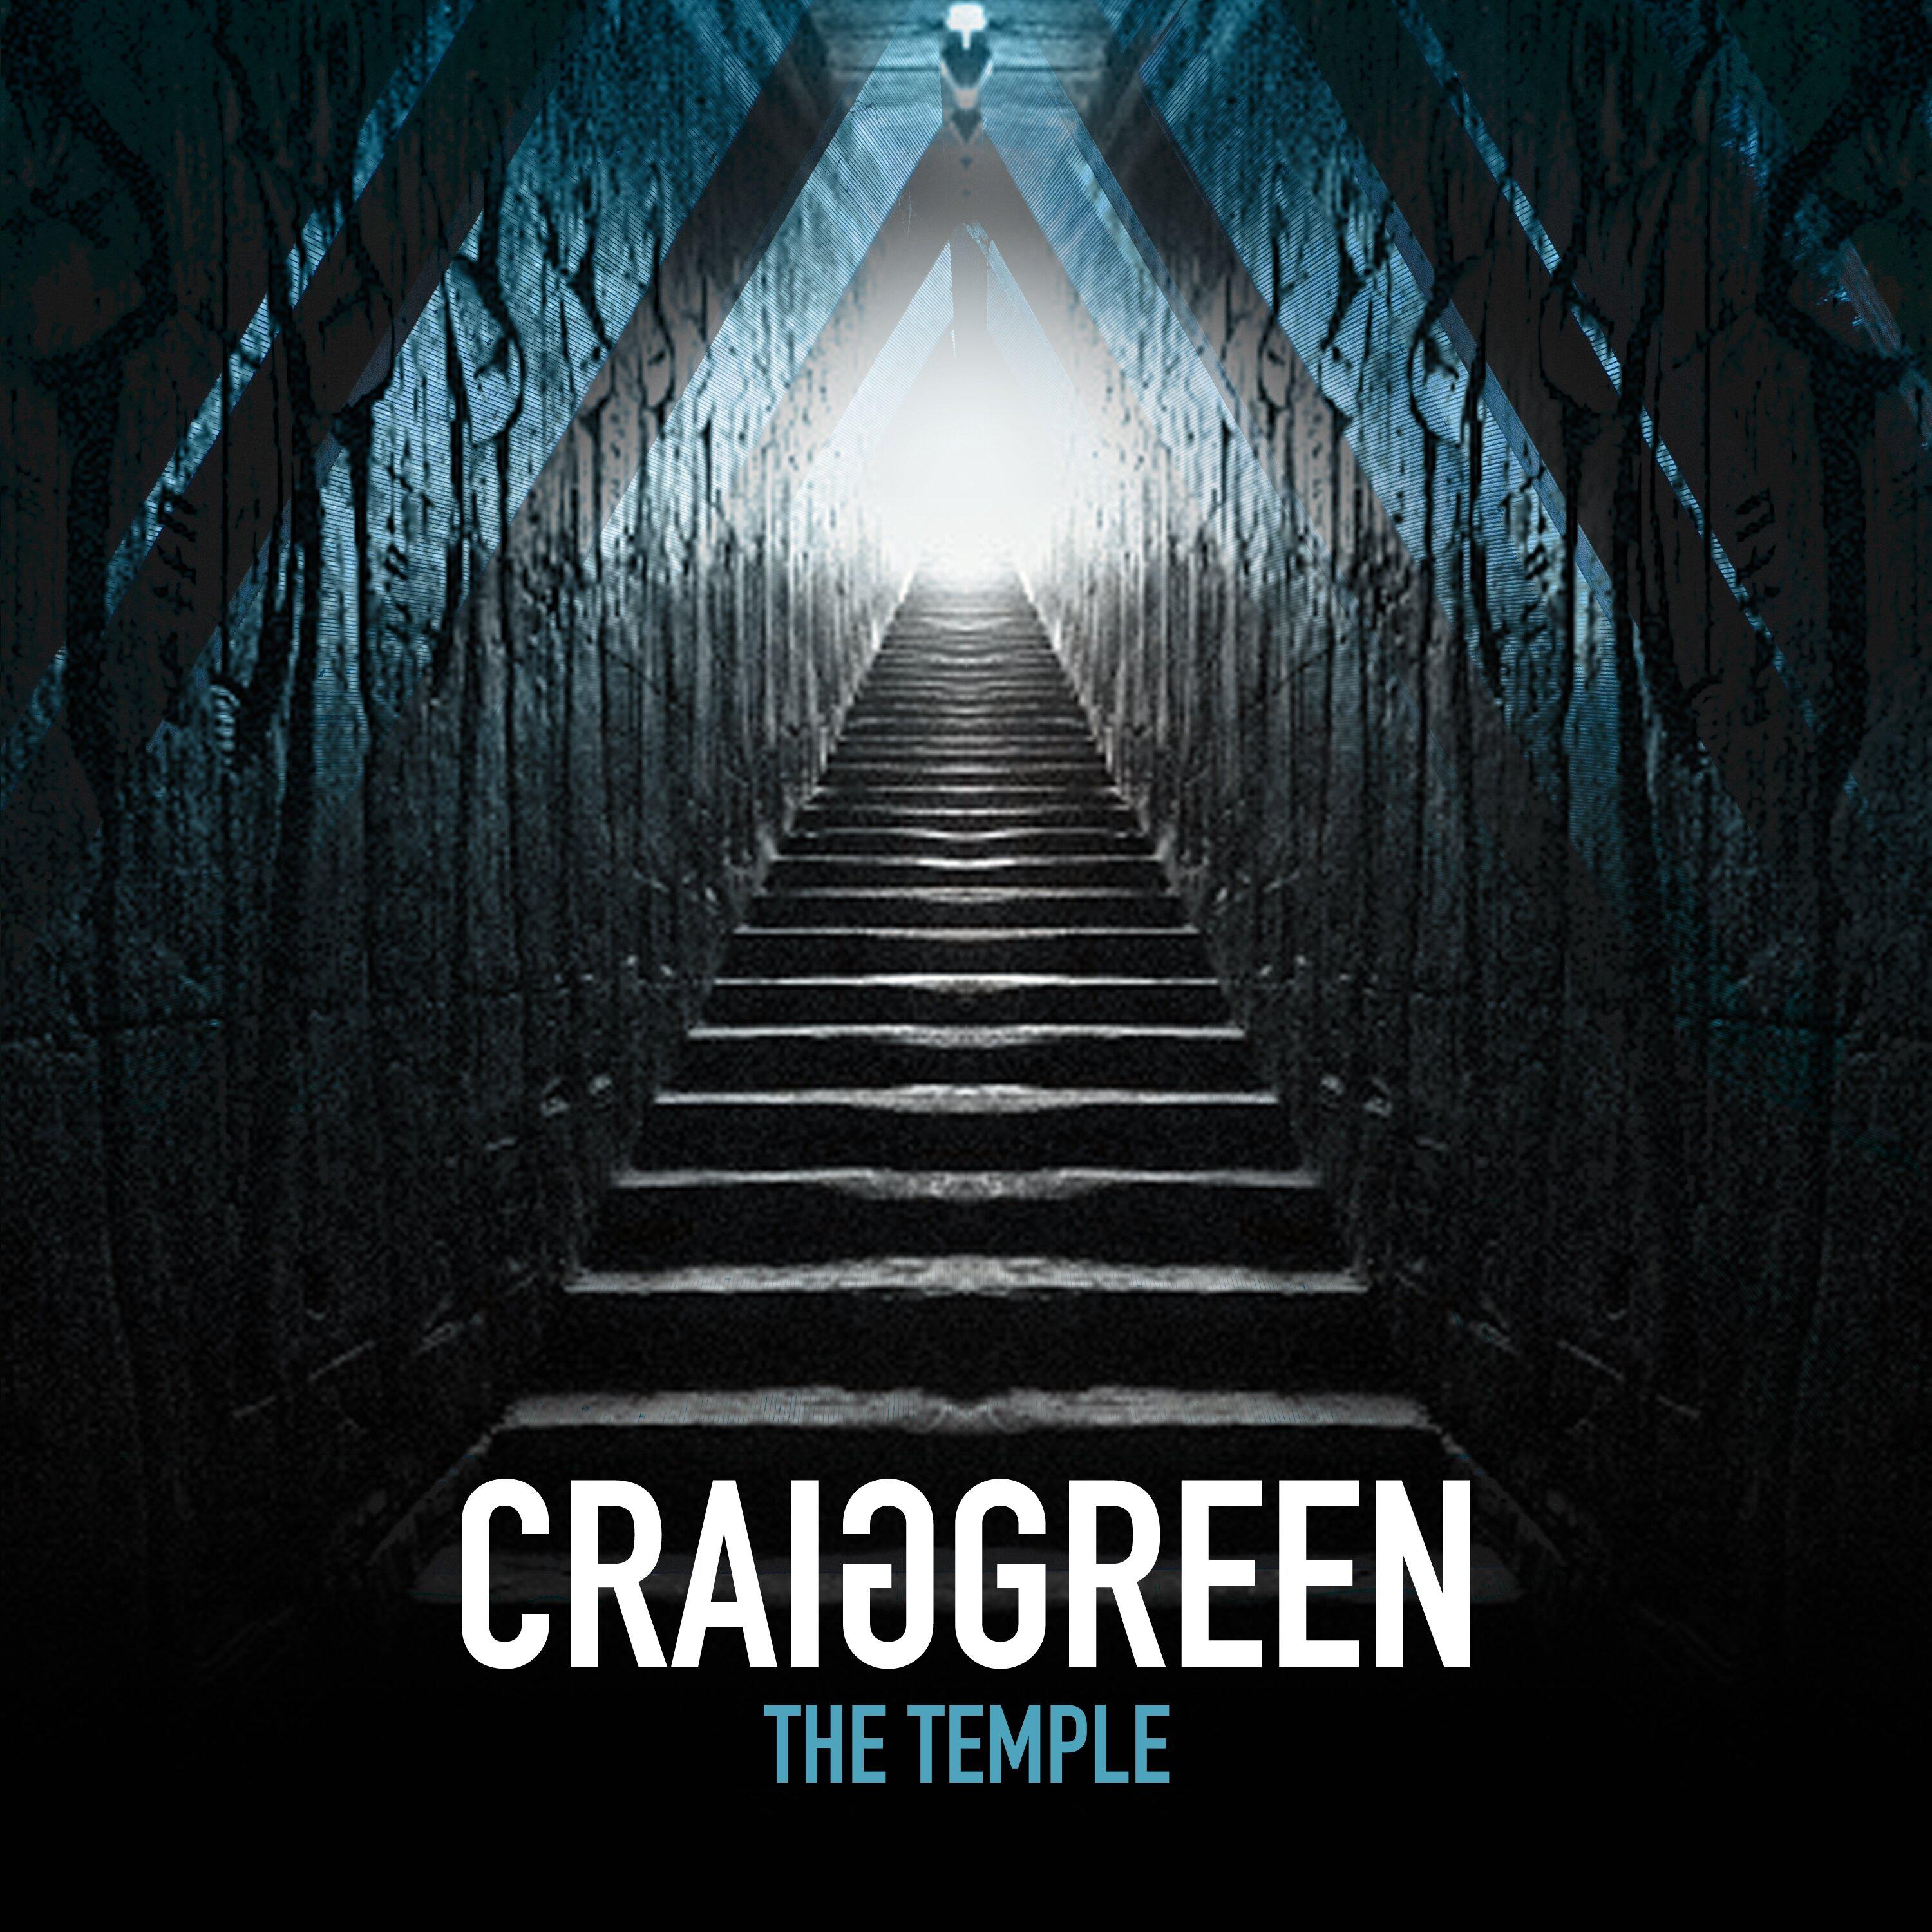 Craig G Green - The Temple